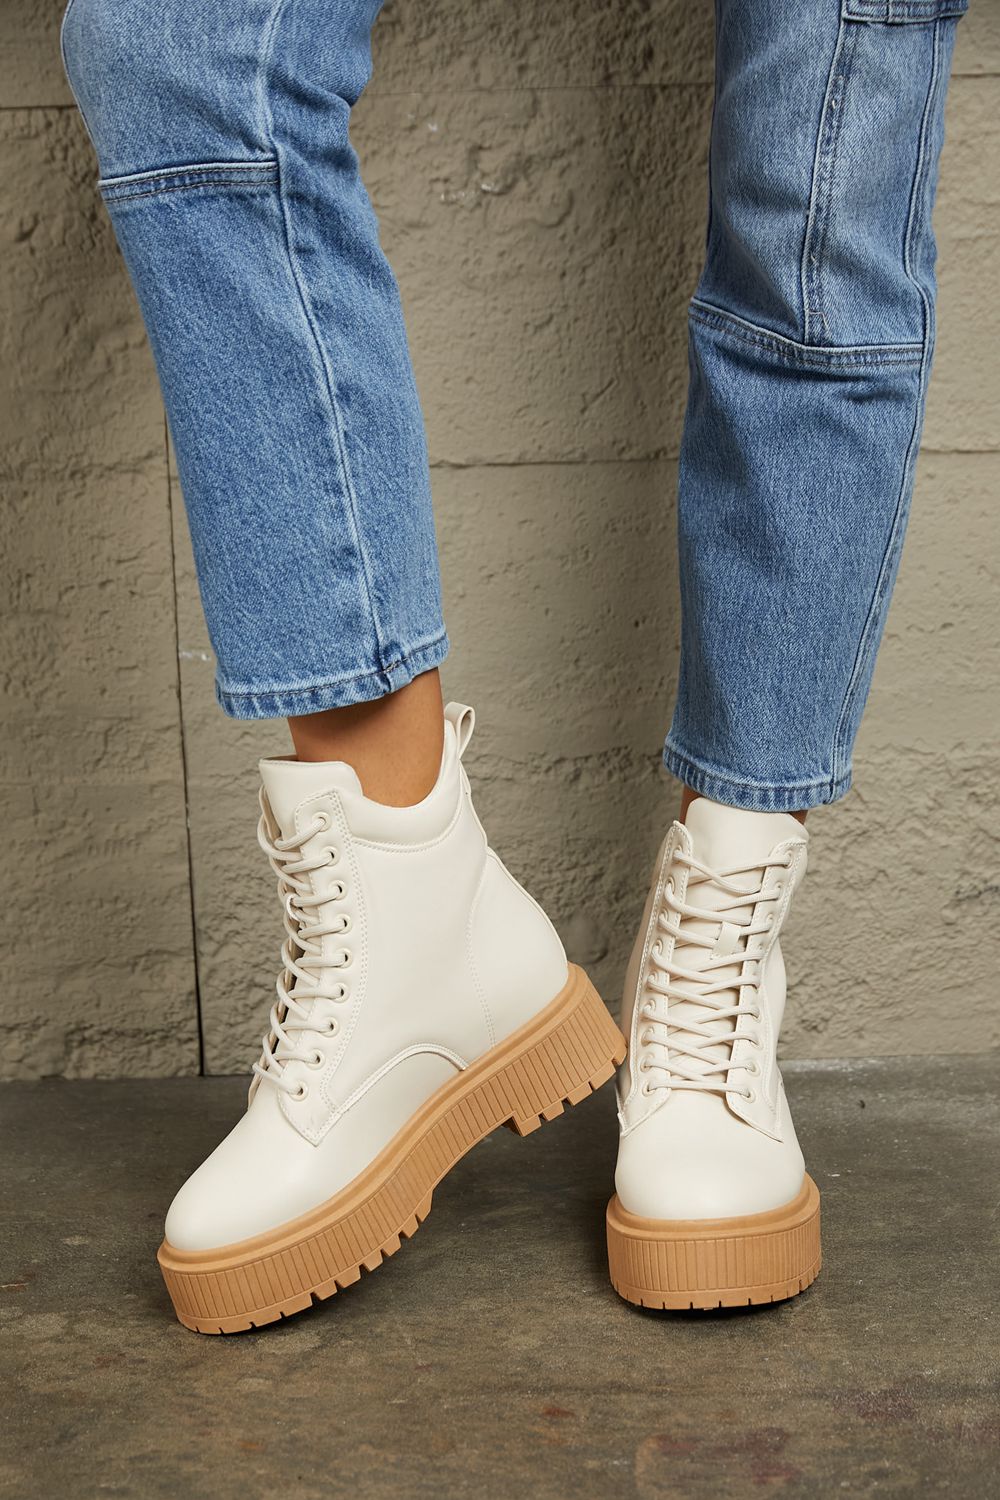 East Lion Corp Platform High Top Ivory White Chunky Sole Thick Lace Up Combat Boots